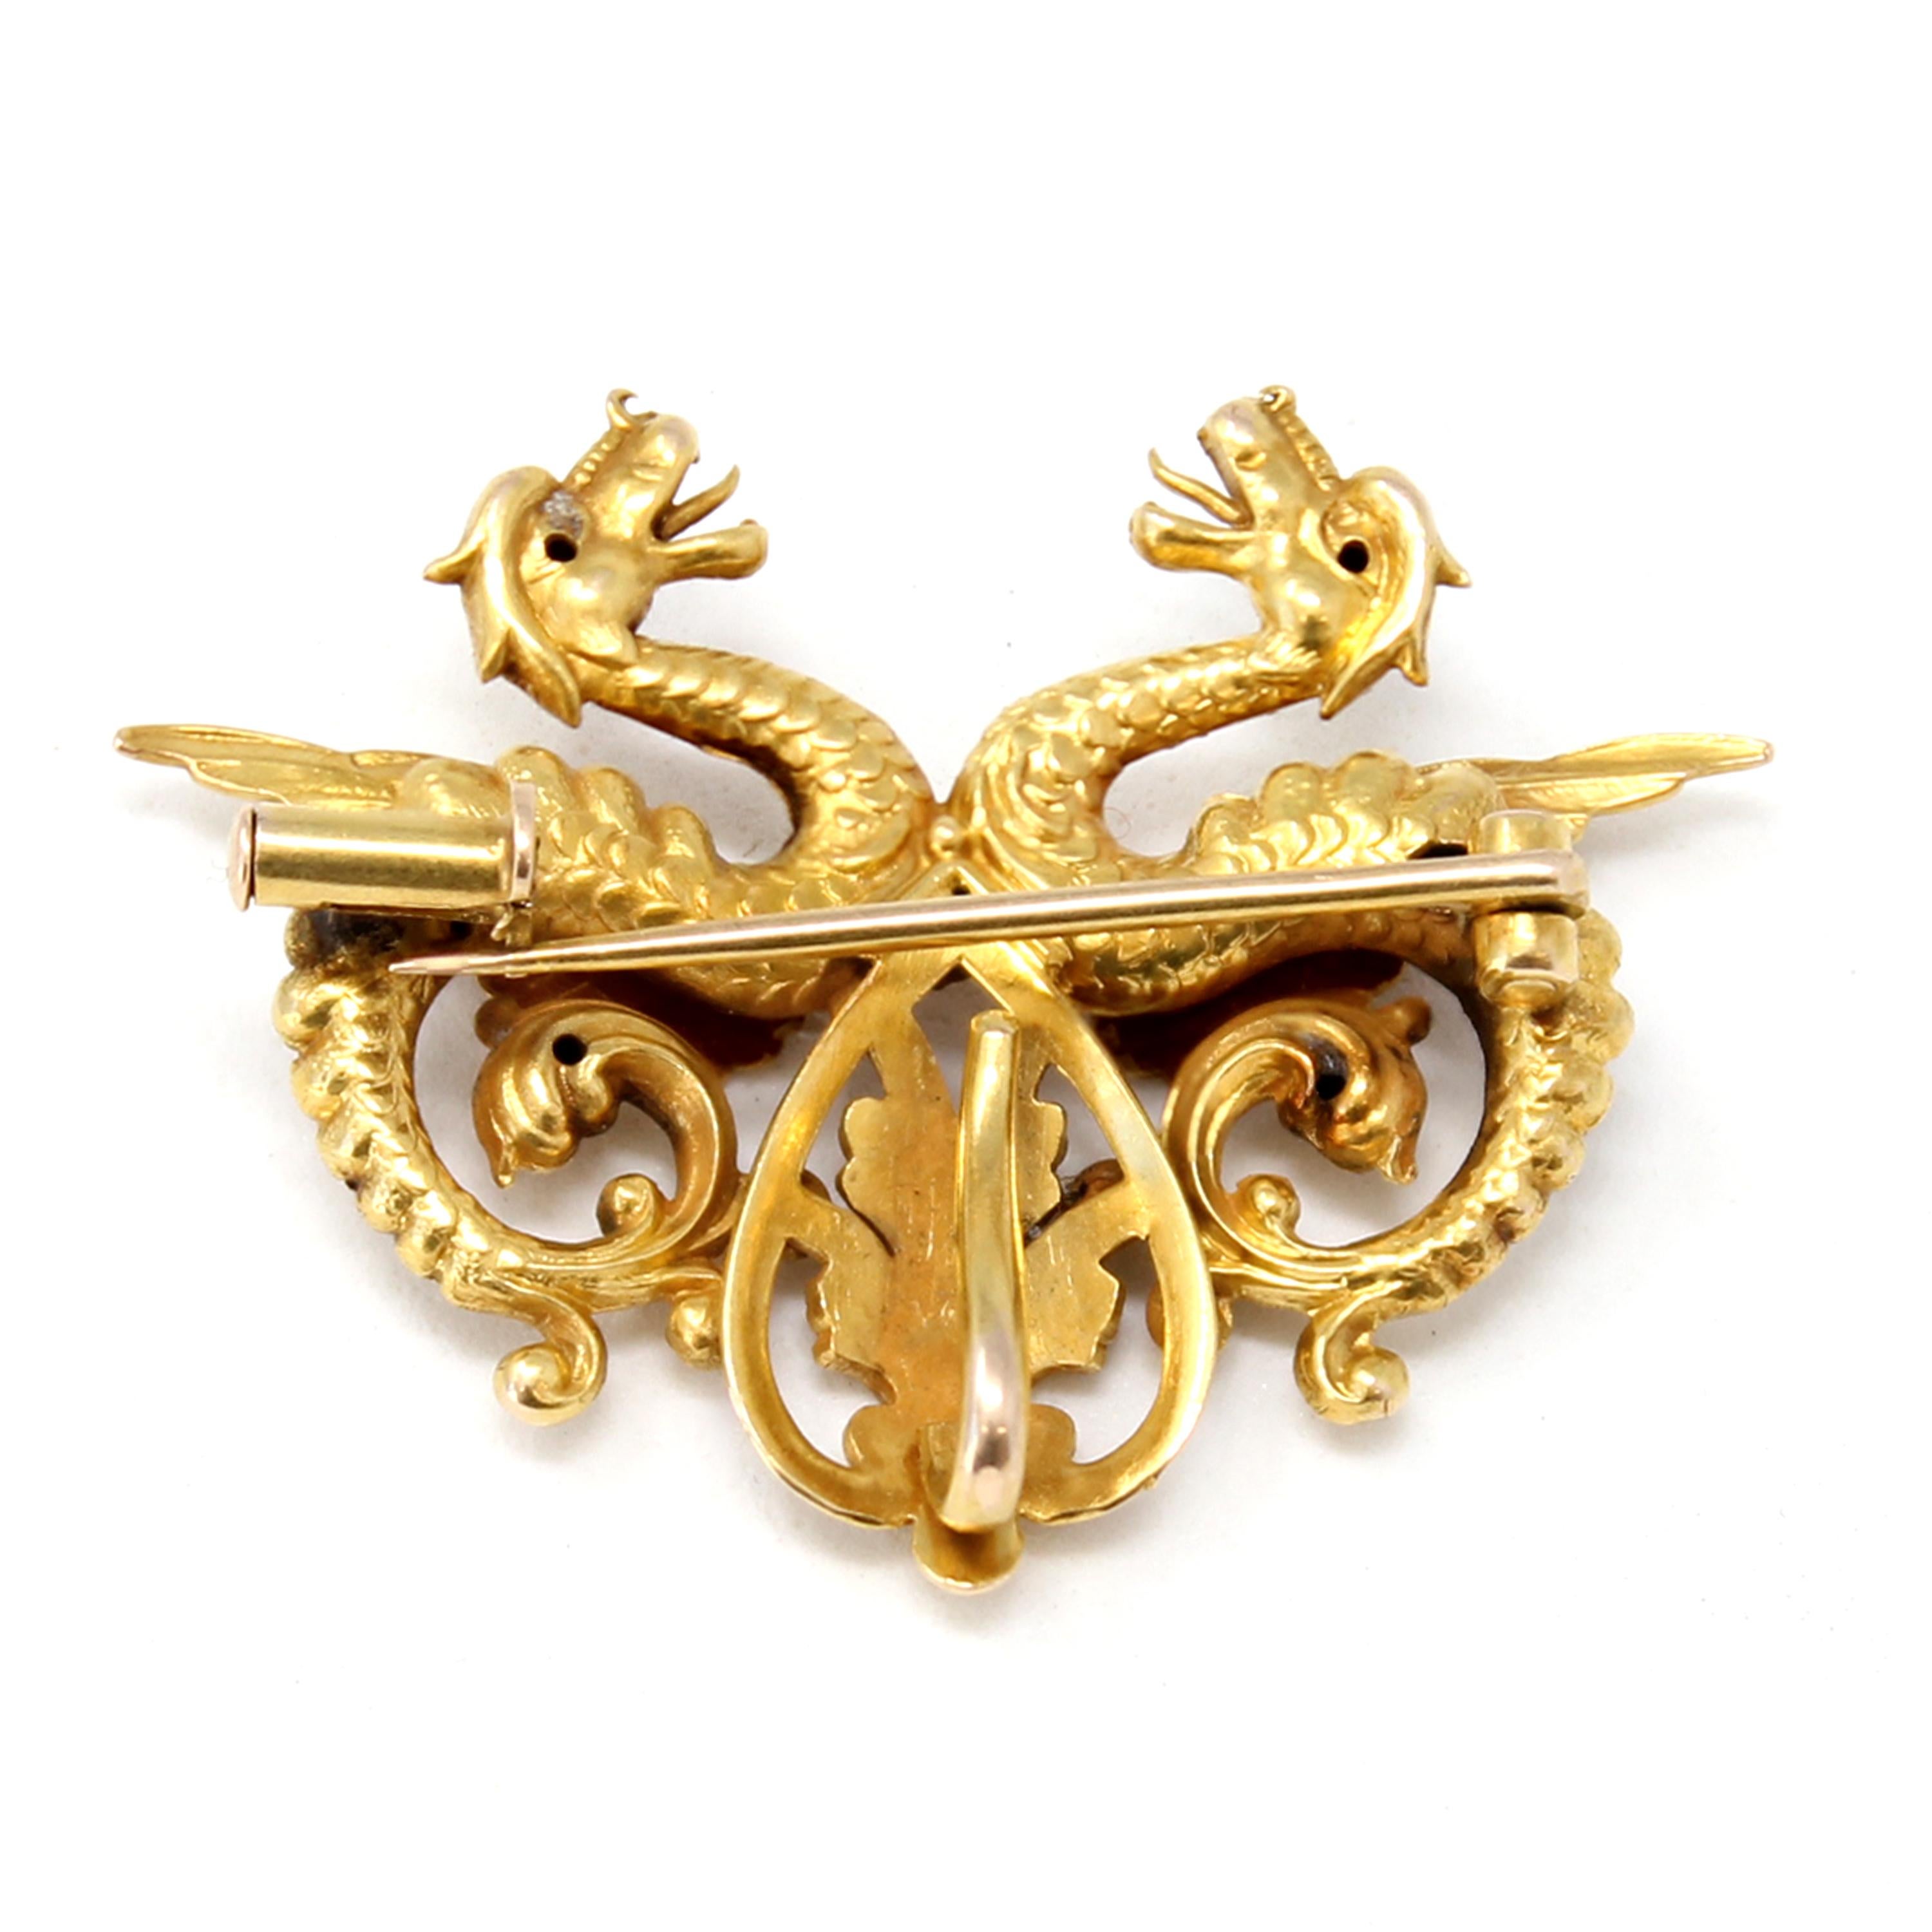 
A brooch converting into a pendant featuring two dragons facing each other set in 14k yellow gold, circa 1940.